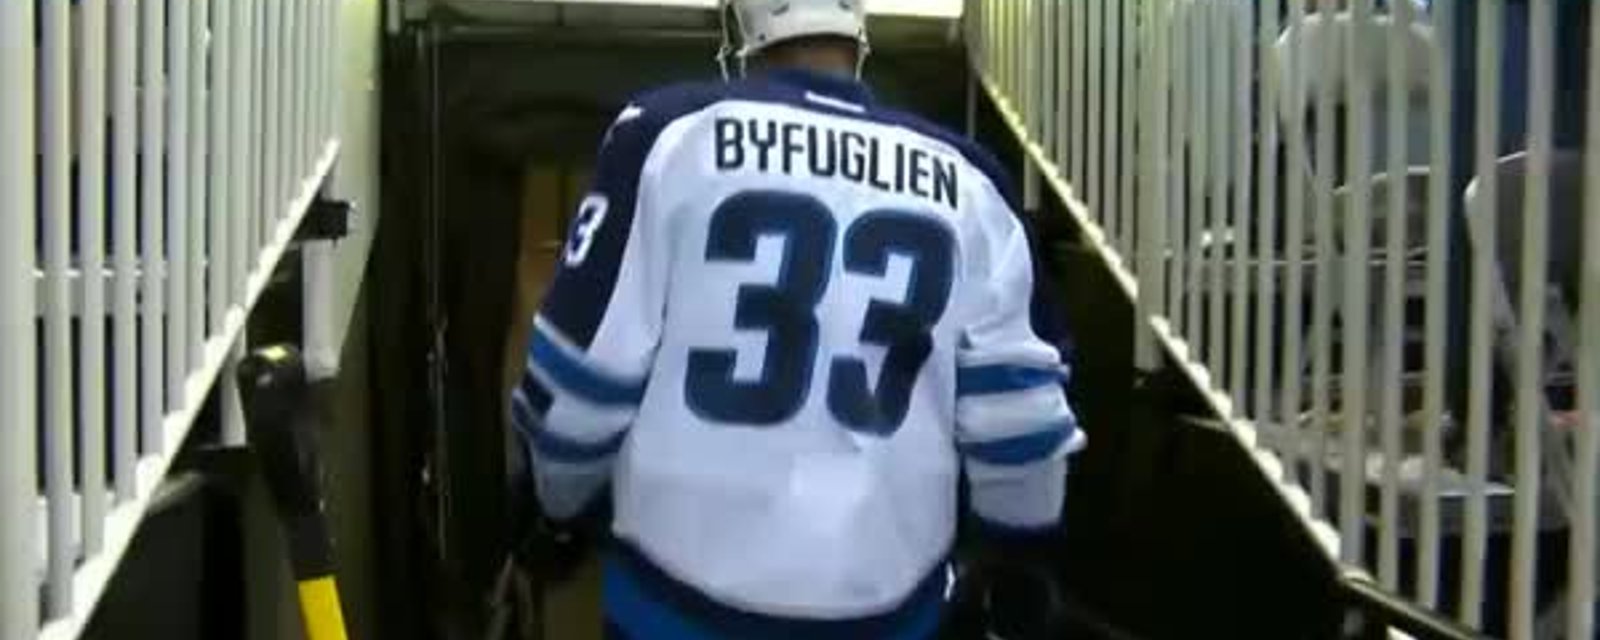 Dustin Byfuglien is reportedly done with hockey 